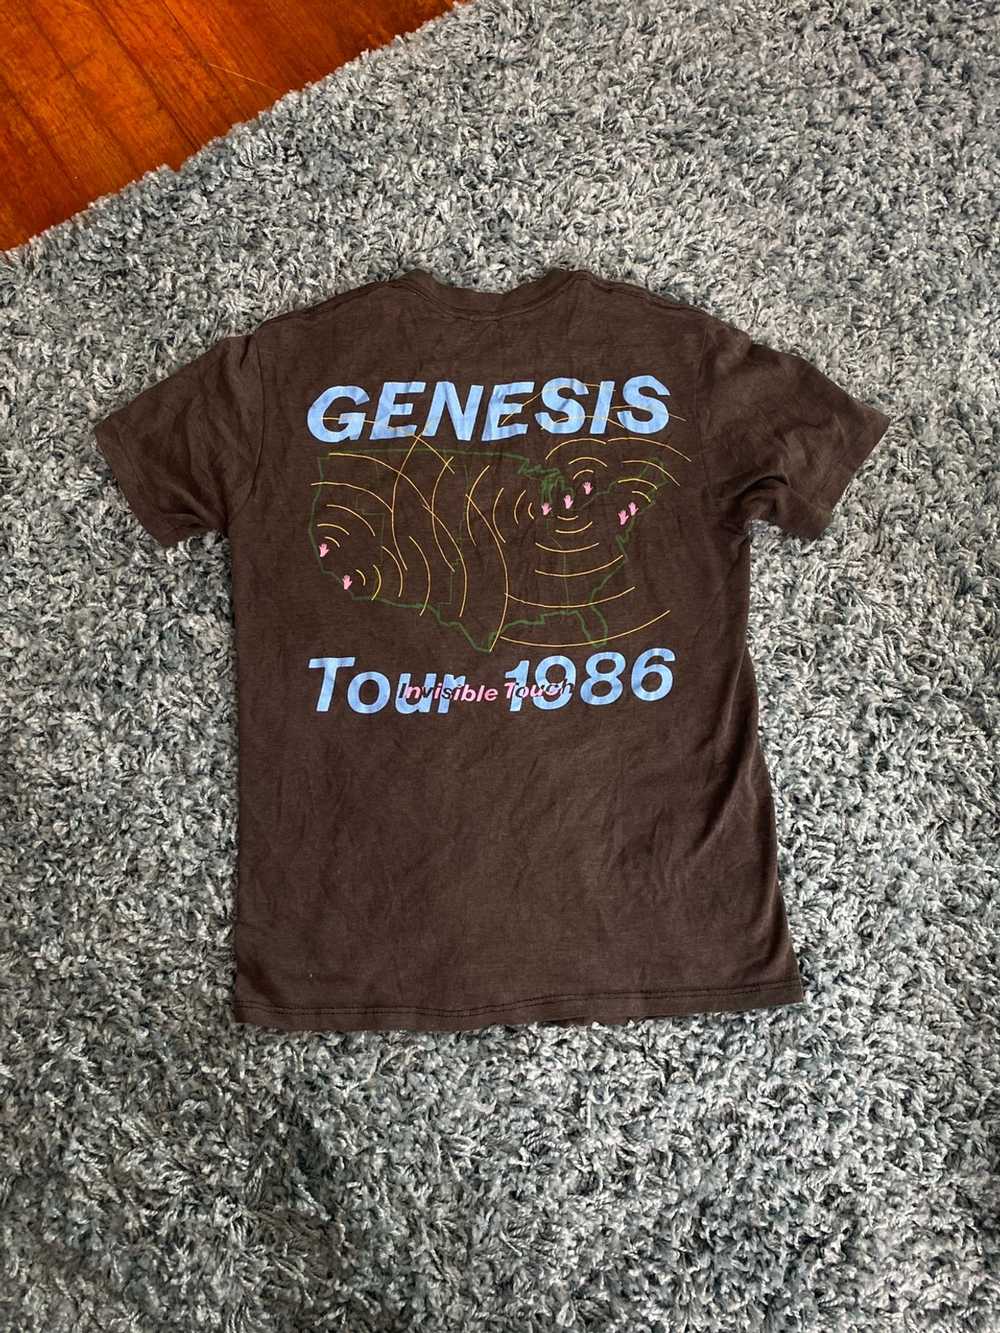 Vintage 1986 GENESIS INVISIBLE TOUCH SHIRT - image 2